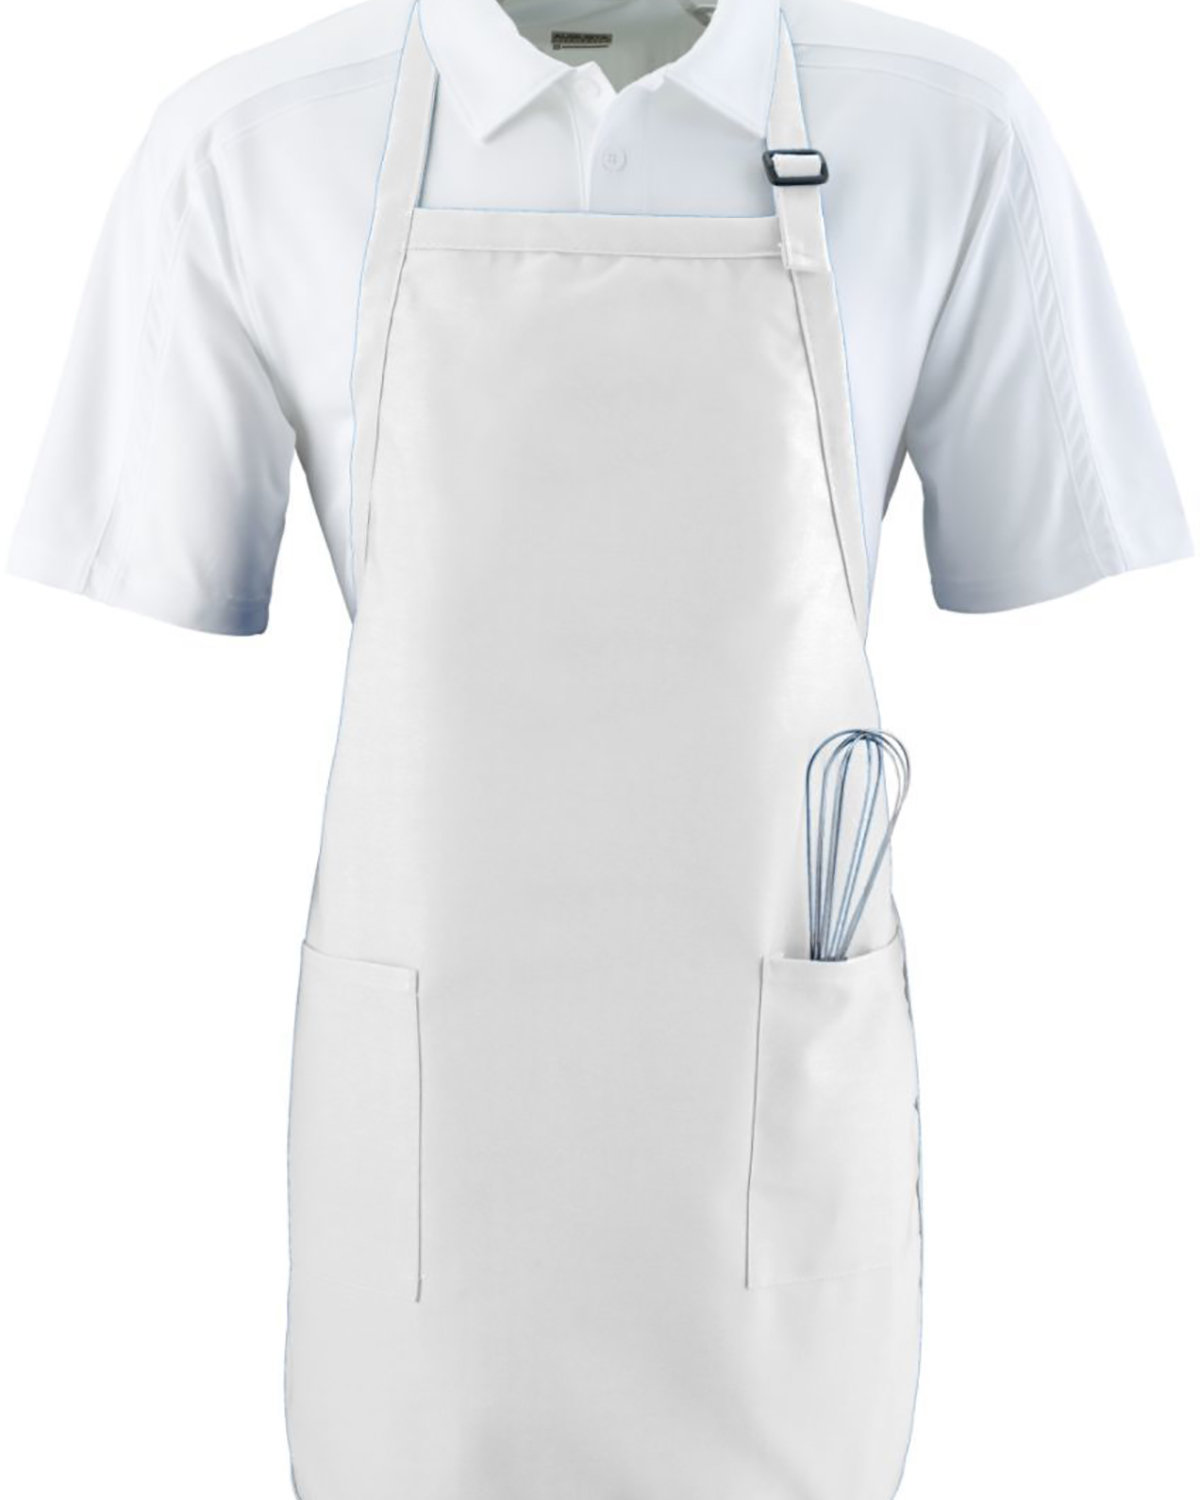 Full Length Apron With Pockets-Augusta Sportswear